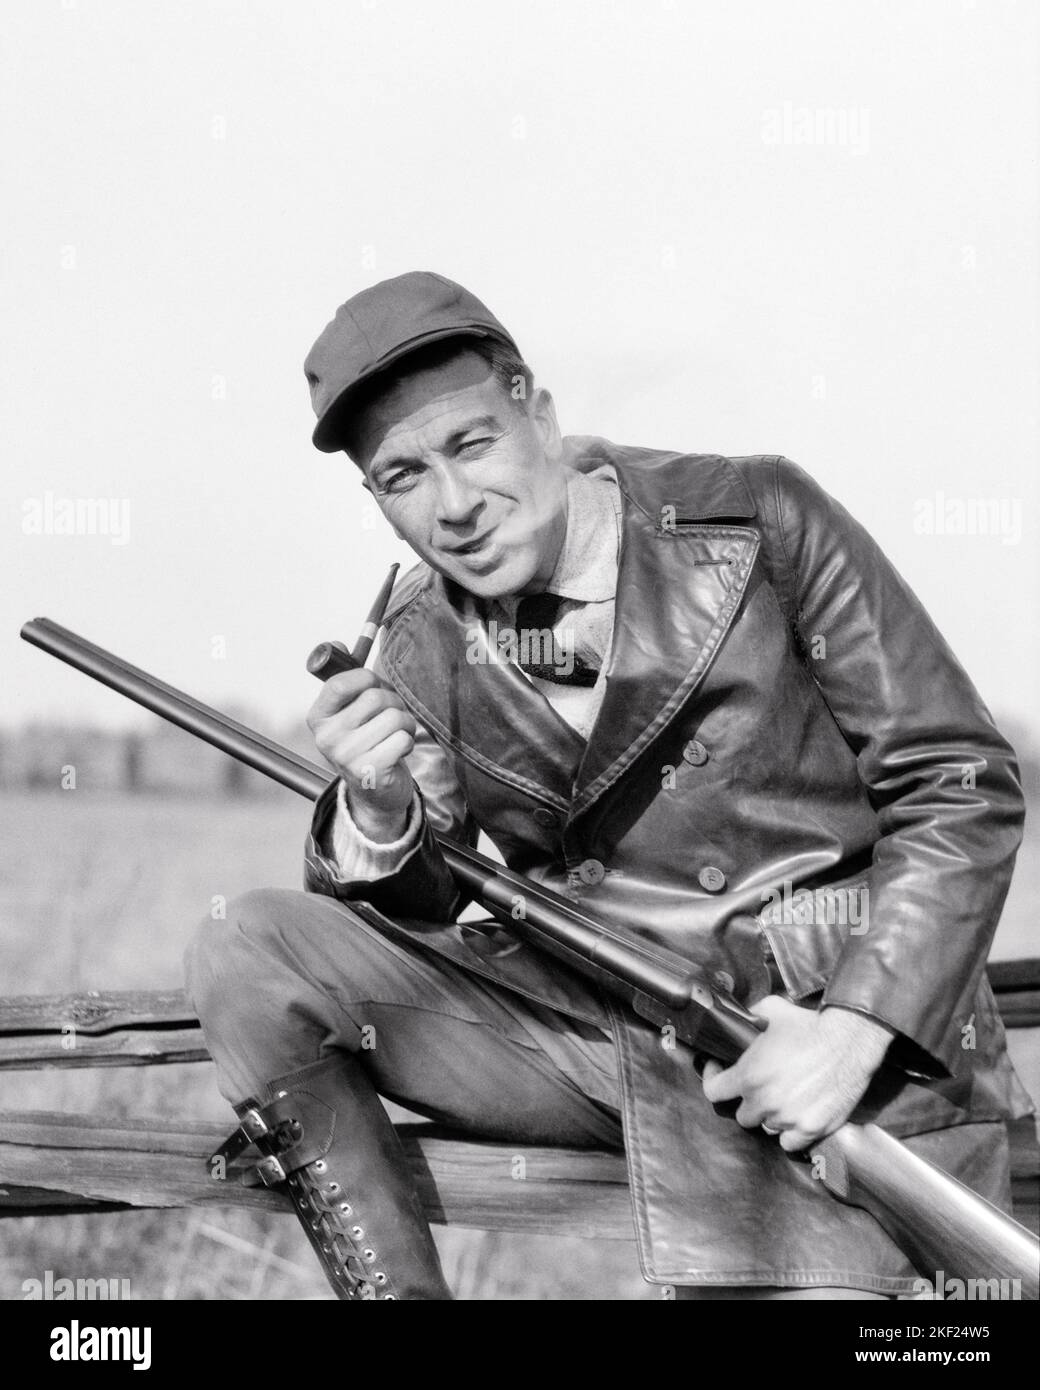 1920s OUTDOORSMAN WEARING LEATHER SHOOTING JACKET HOLDING A SHOTGUN SMOKING A PIPE SMOKE ESCAPING HIS MOUTH LOOKING AT CAMERA - g249 HAR001 HARS B&W HUNT EYE CONTACT ADVENTURE HIS PIPES STYLES TOBACCO BAD HABIT SMOKER NICOTINE ESCAPING CONCEPTUAL ADDICTIVE STYLISH OUTDOORSMAN FASHIONS FIREARM FIREARMS HUNTERS MID-ADULT MID-ADULT MAN SHOTGUNS BLACK AND WHITE CAUCASIAN ETHNICITY HAR001 OLD FASHIONED Stock Photo